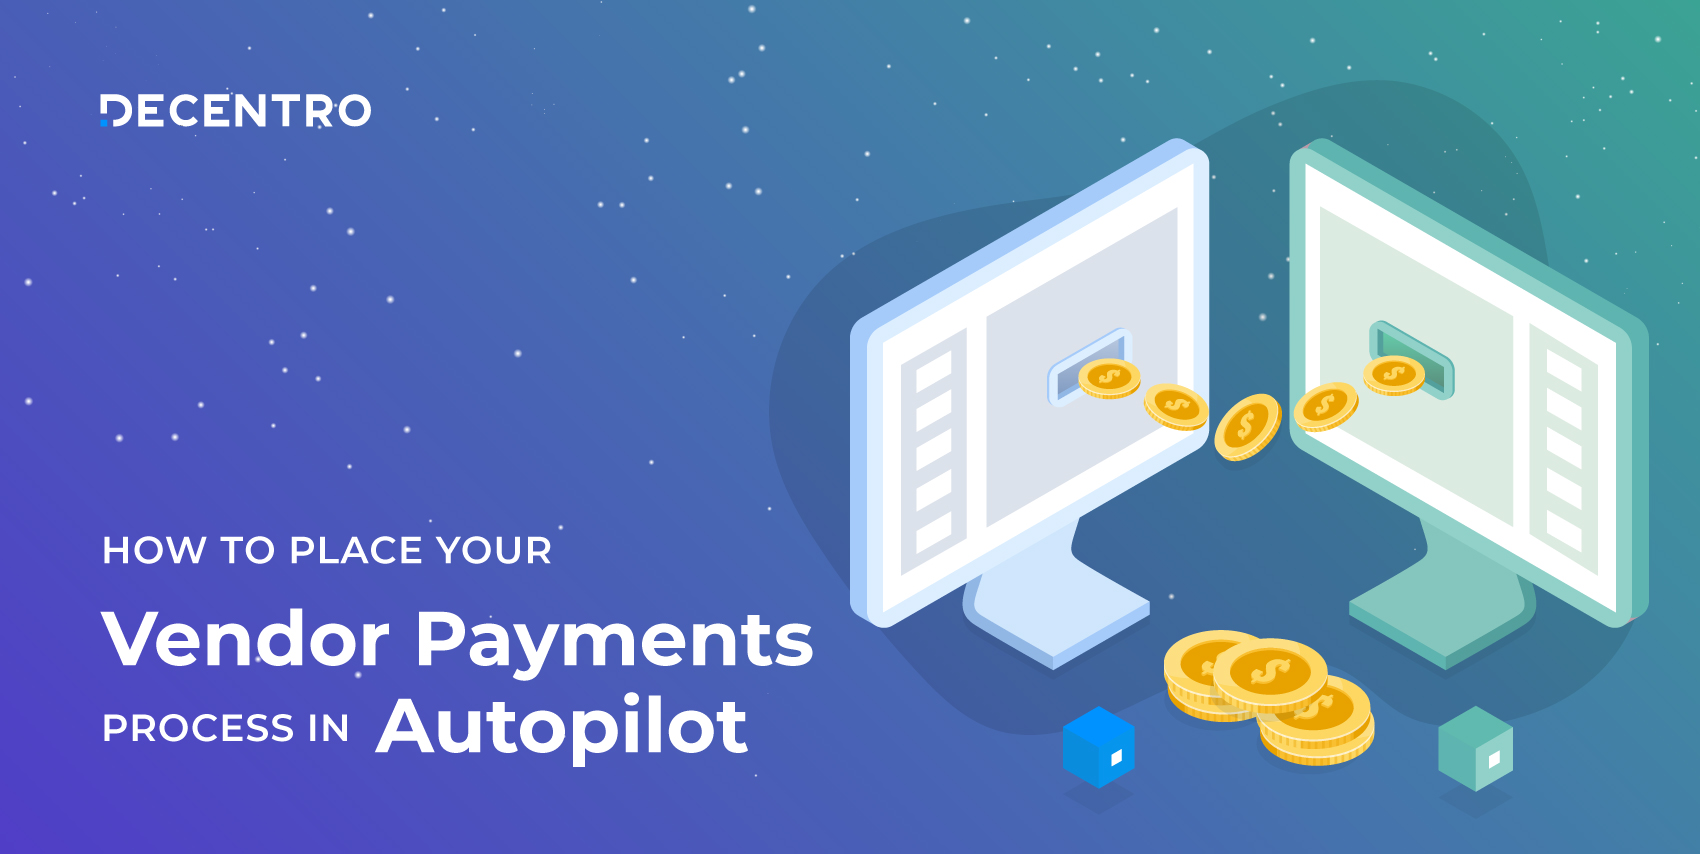 Here's how your business can put vendor payments on auto-pilot with Decentro.